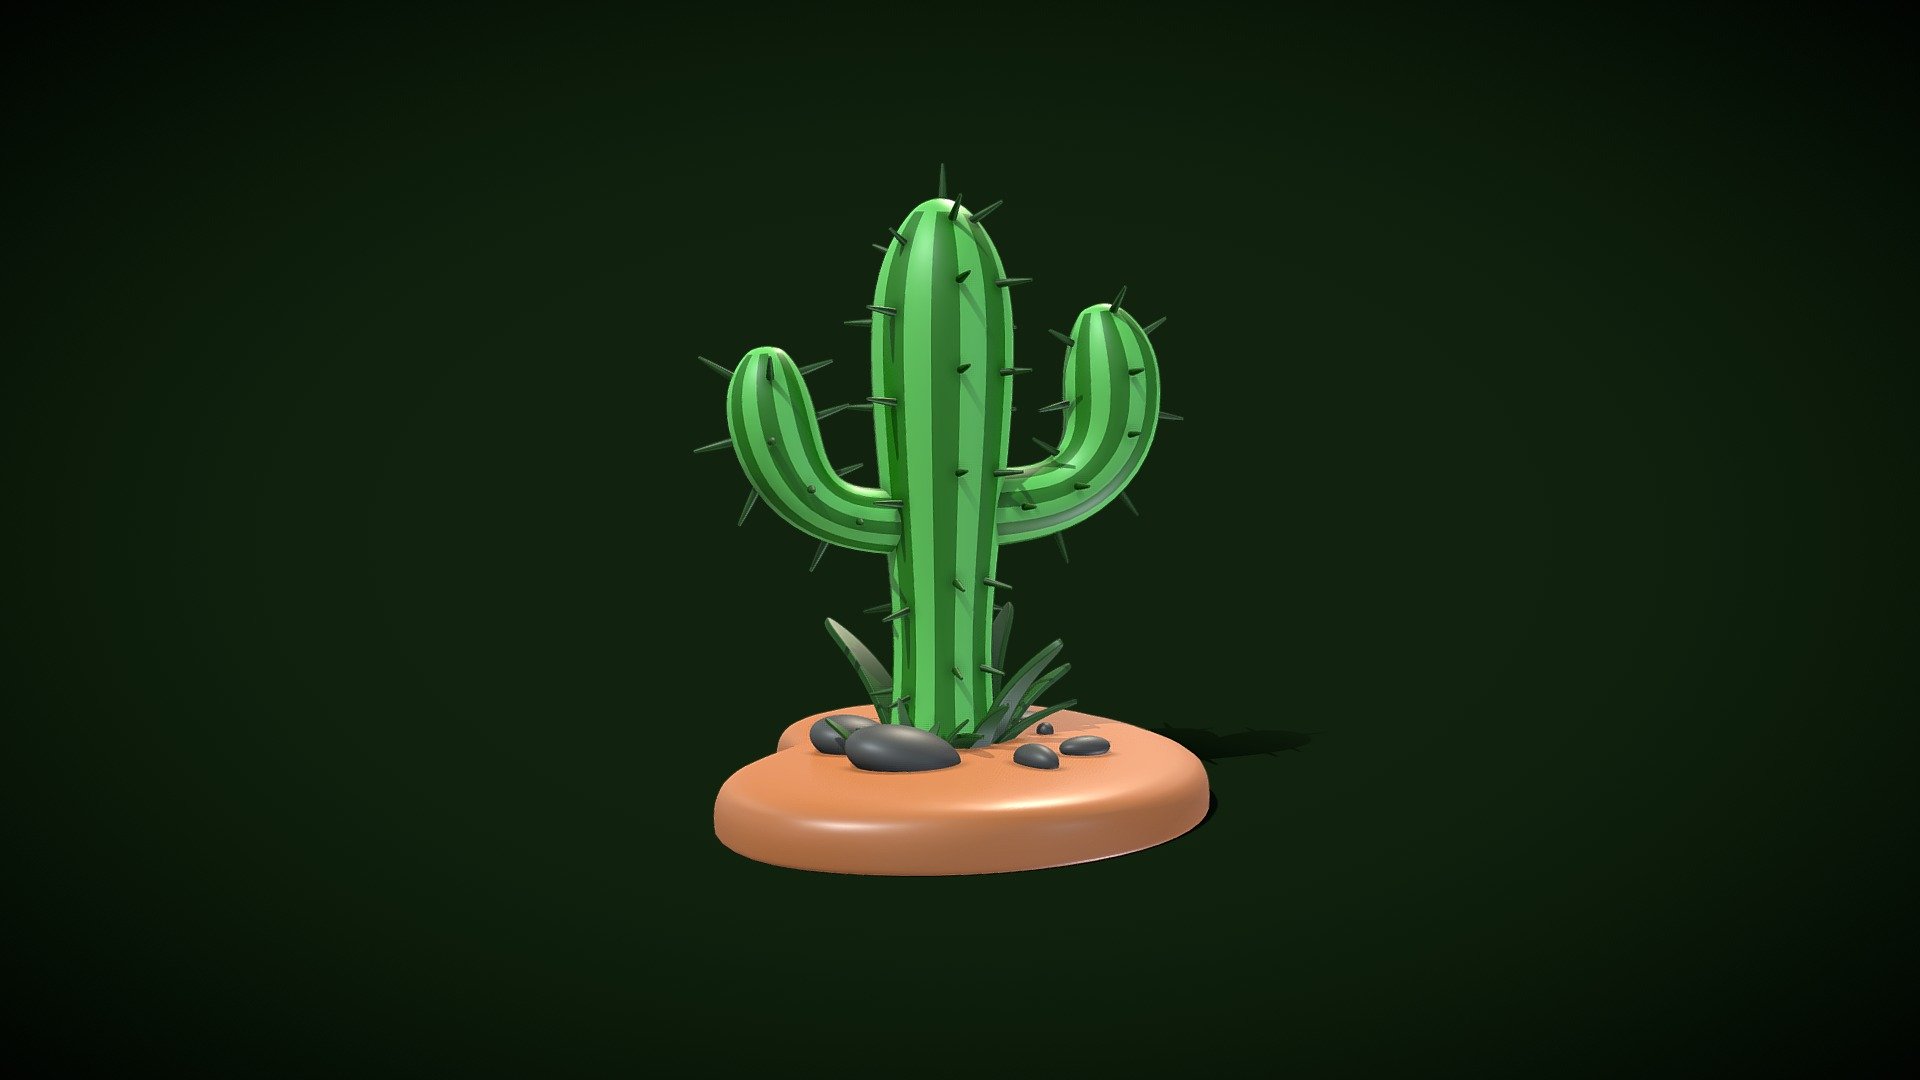 Cactus 3D Model made in blender 2.83 and rendered in cycles.

3D Printable and Scalable Model.

Wireframe render images are without subdivision.

Model Size:-
Length : 10 cm,
Width : 9 cm,
Height : 11 cm.

Statistics:-
Verts : 261410,
Faces : 261216,
Tris : 522432 3d model